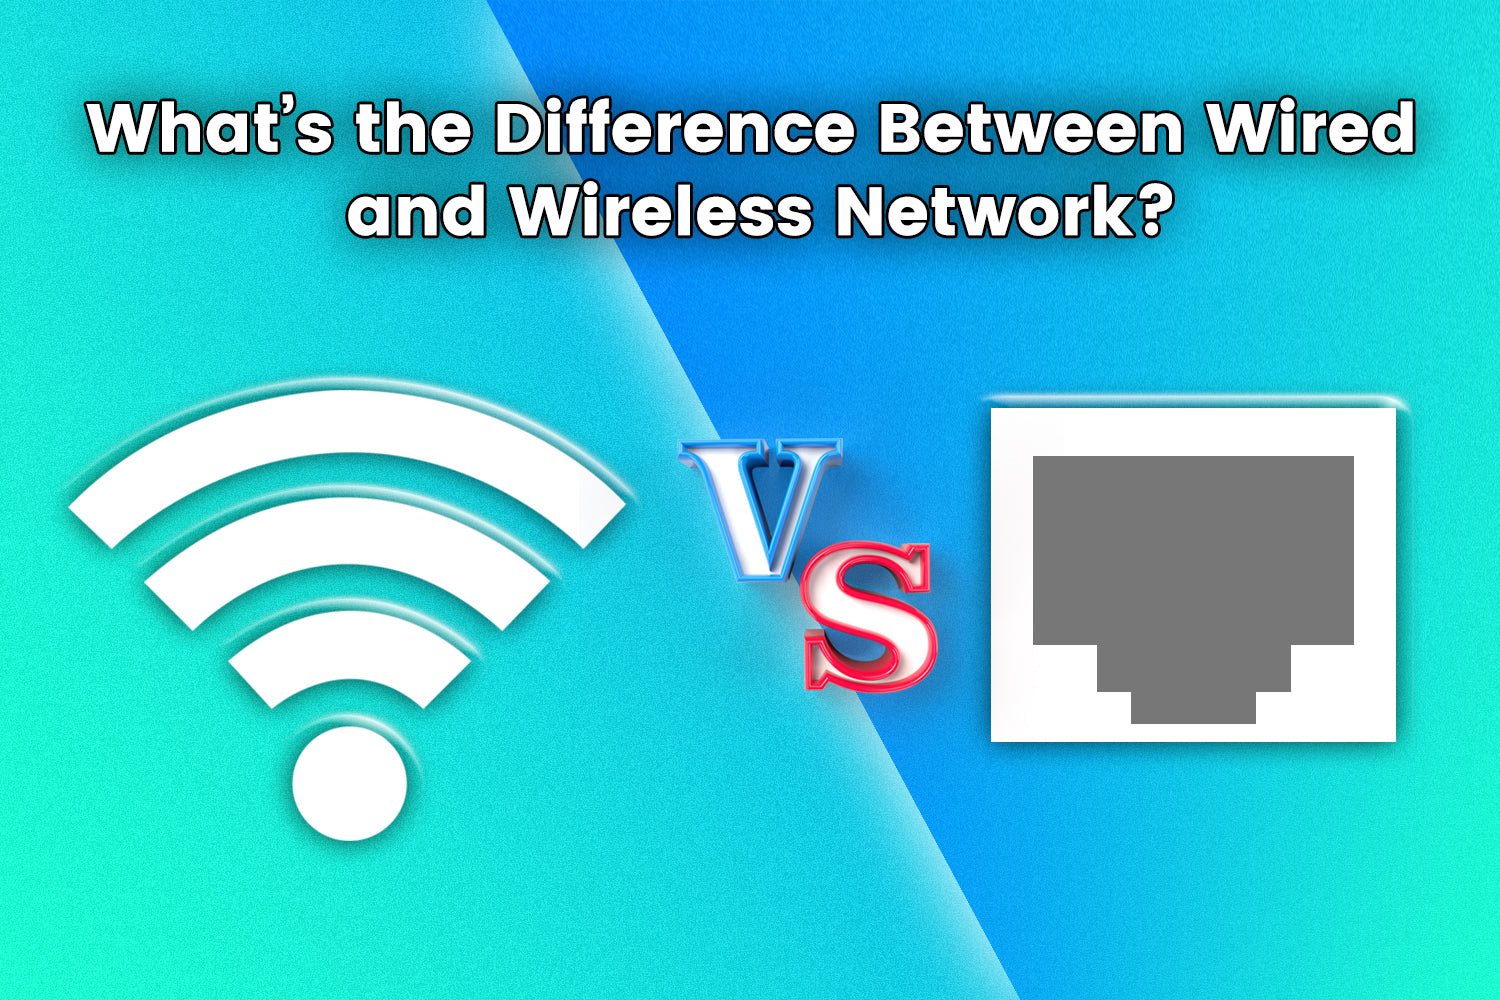 Wired vs Wireless – The Better Option for Gaming